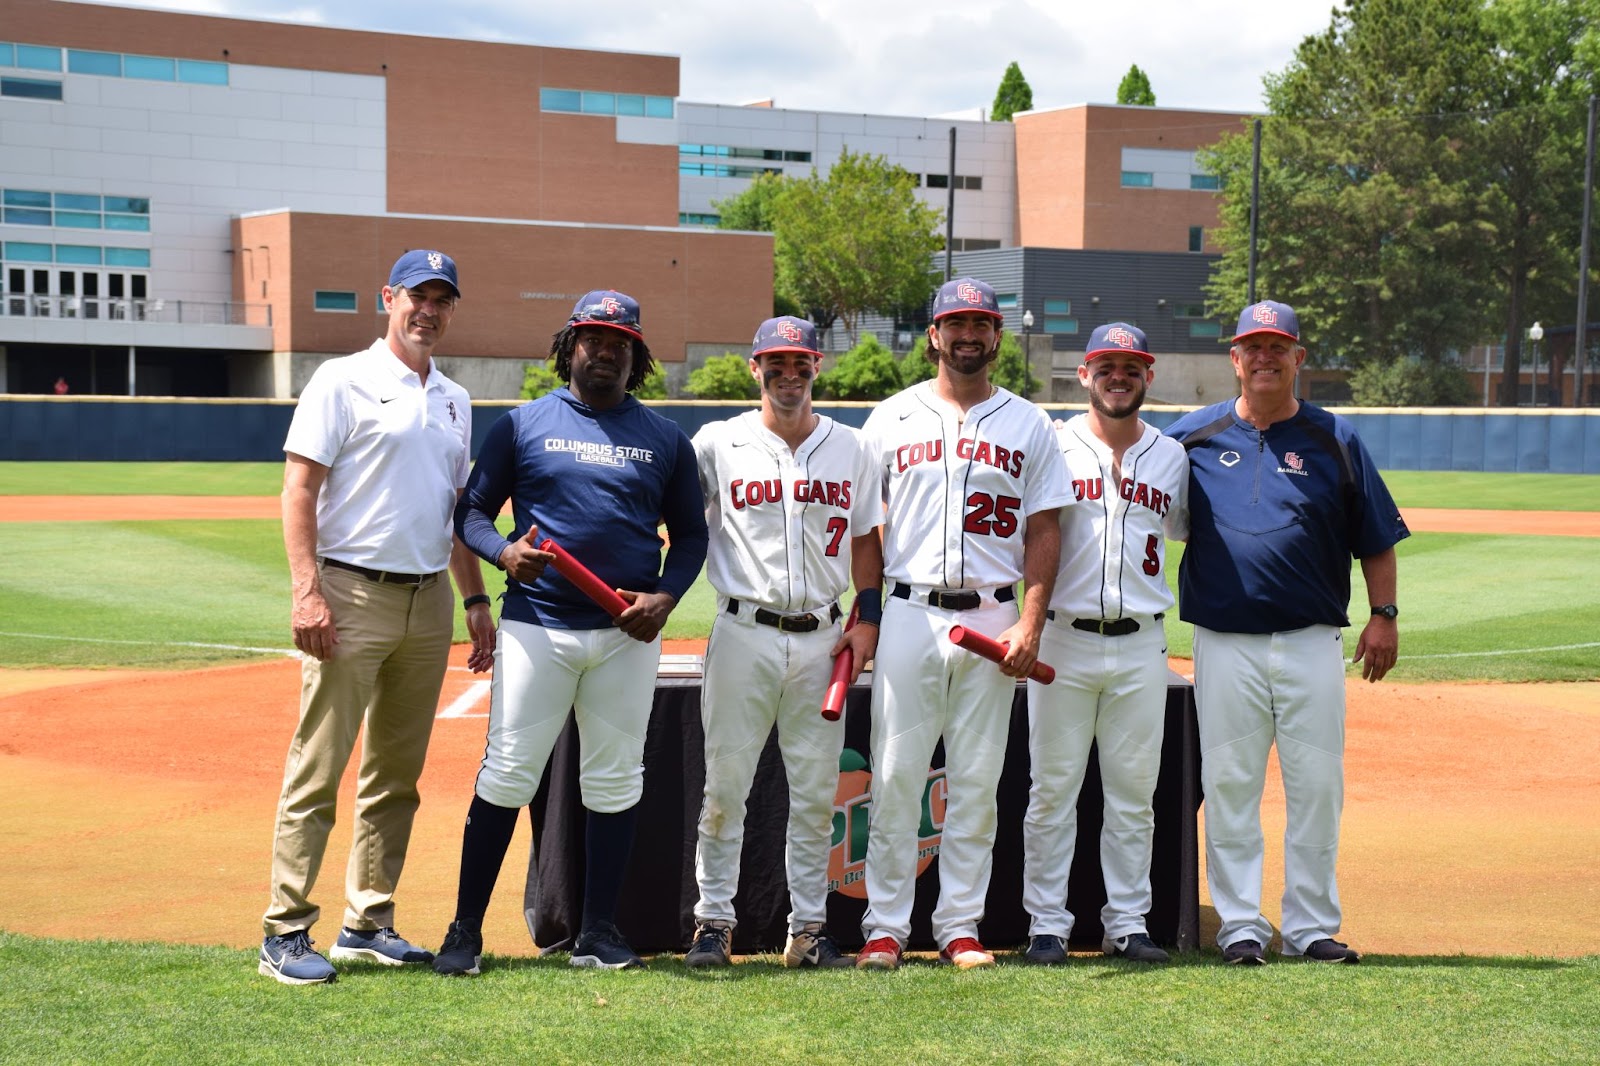 Baseball Team graduates and coaches; from left to right: Coach Patrick Collins, Graduate Assistant Coach Perez Knowles, David Meadows, Jamie Boatright, Hunter Woodall,  Coach Greg Appleton